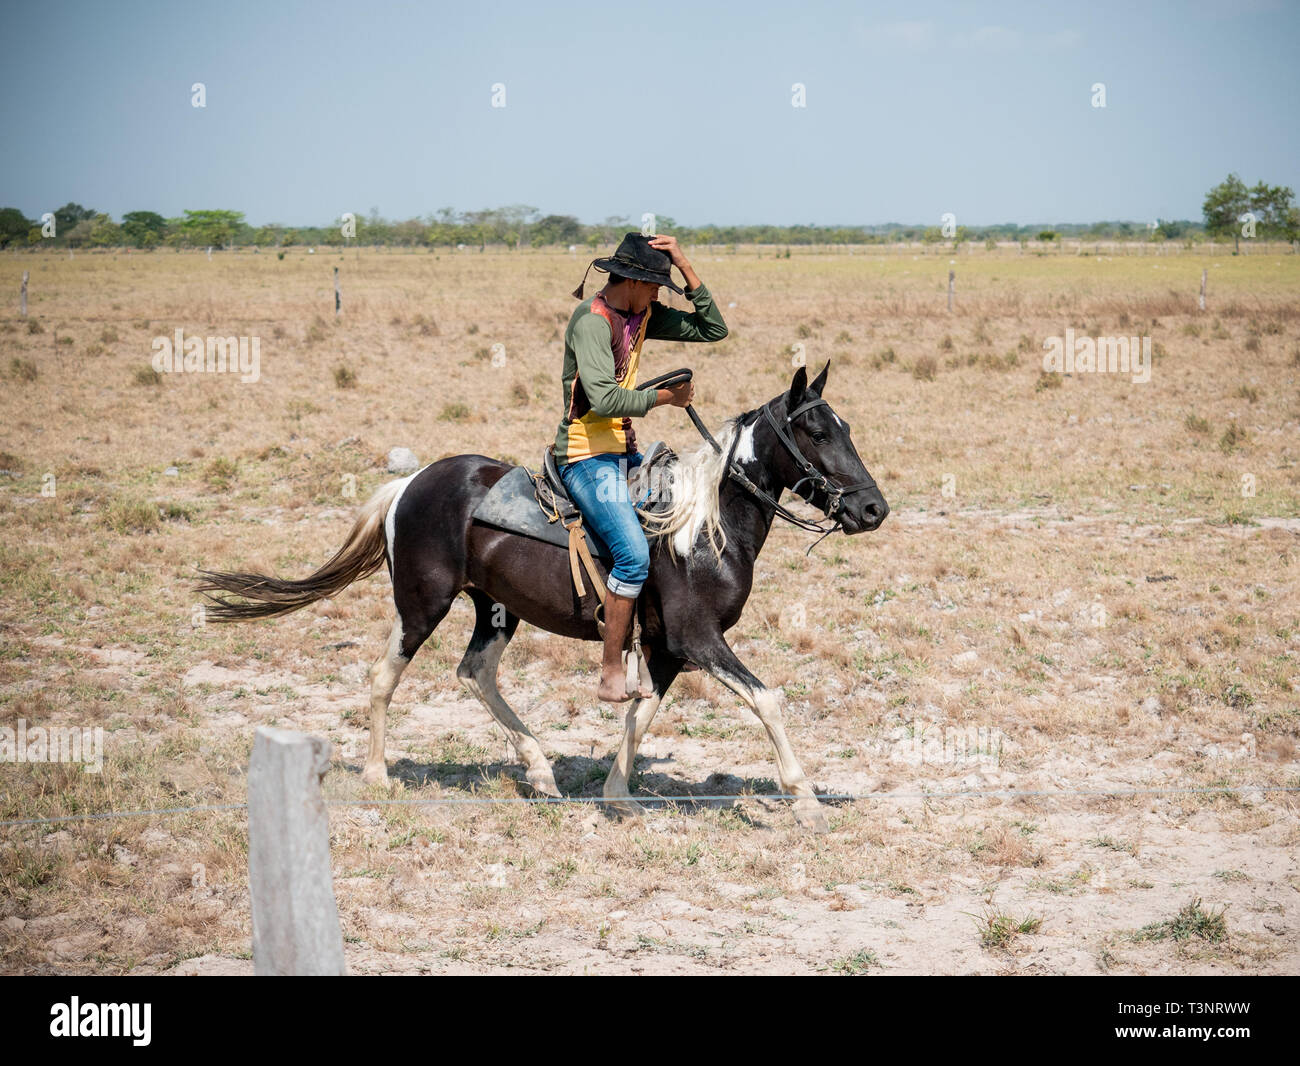 February 9, 2019 - Finca El ParaÃ-So/Yopal, Casanare, Colombia - A cowboy seen riding his horse at the El ParaÃ-so farm.Colombian cowboys taking care of the cows in the region of Casanare, eastern Colombia, between the Ands, the Orinoco River and the border with Venezuela. These are Plains and pastures with wide rivers and marshes, a region of big biodiversity. But nowadays, it is in danger because of climate change. Credit: Jana Cavojska/SOPA Images/ZUMA Wire/Alamy Live News Stock Photo